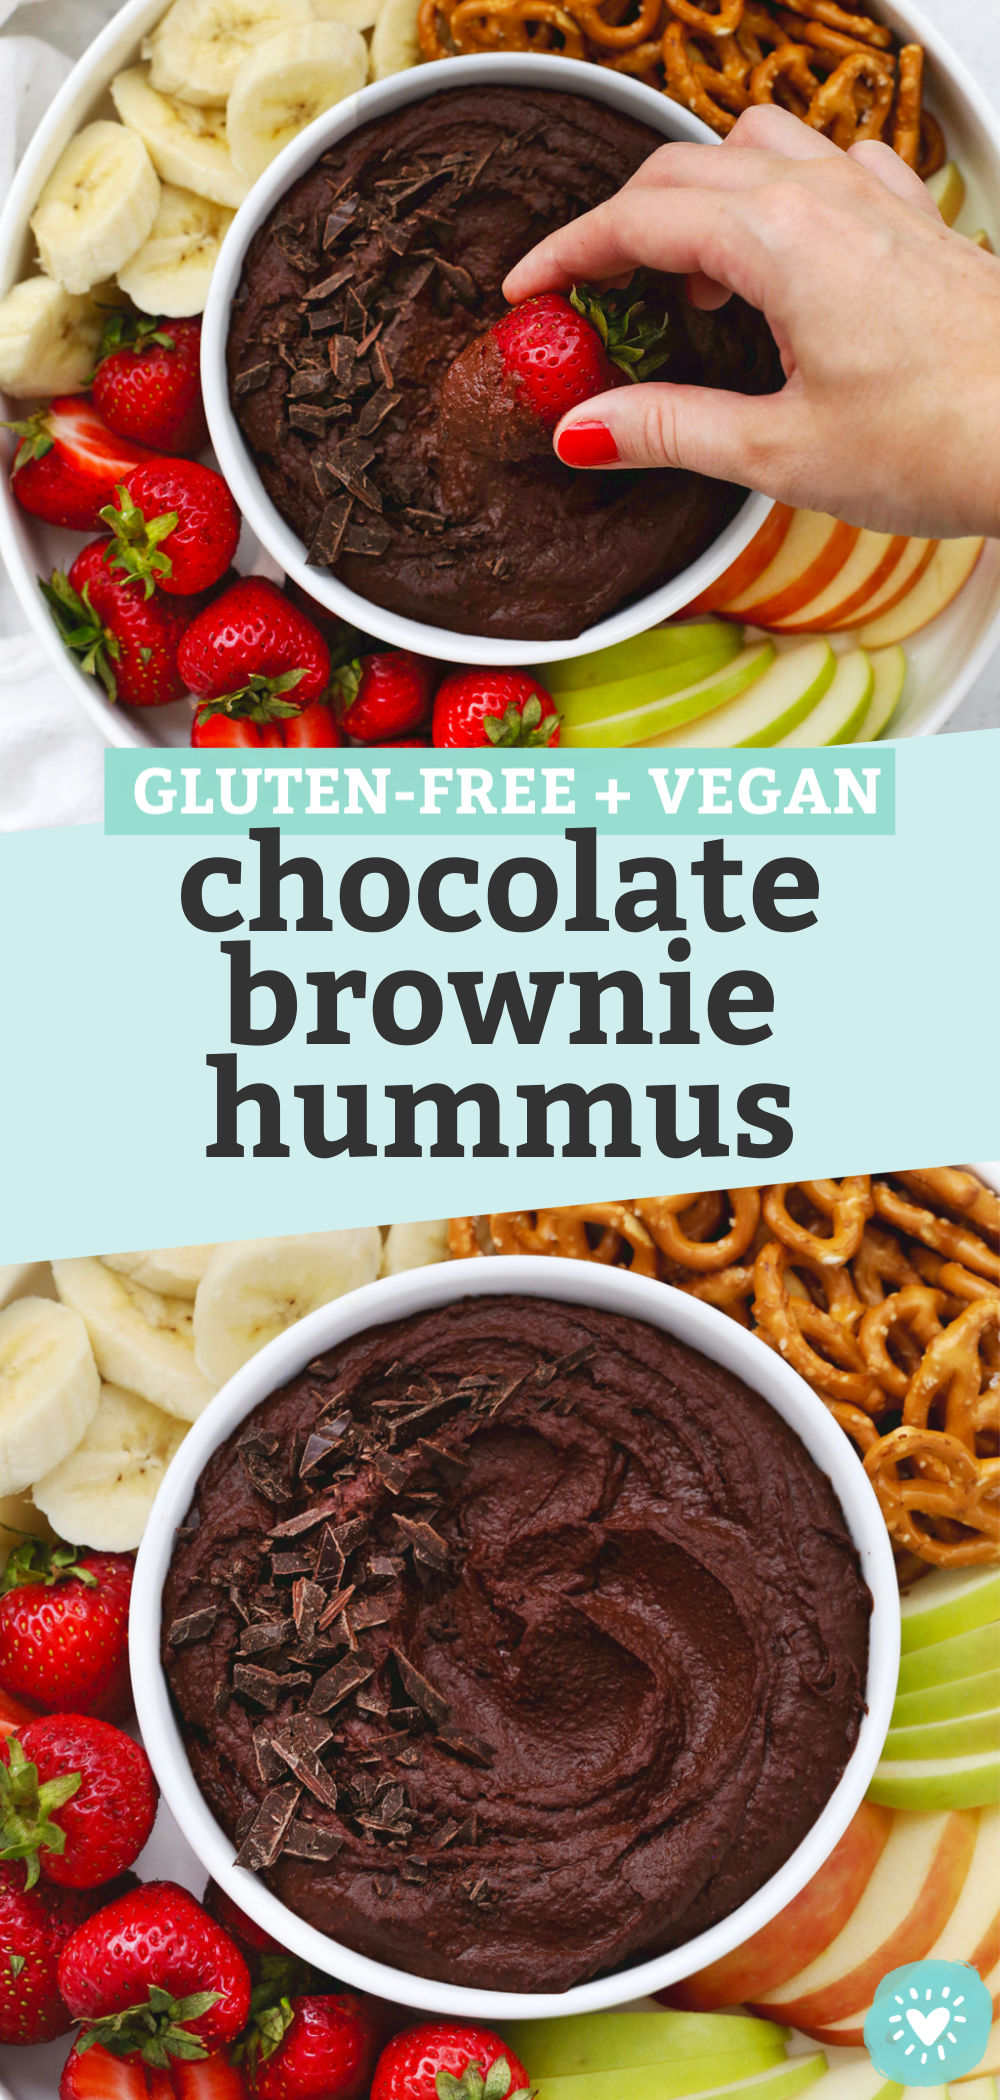 Two photos of chocolate brownie hummus on a fruit plate with text overlay that reads "Gluten-Free + Vegan Chocolate Brownie Hummus"